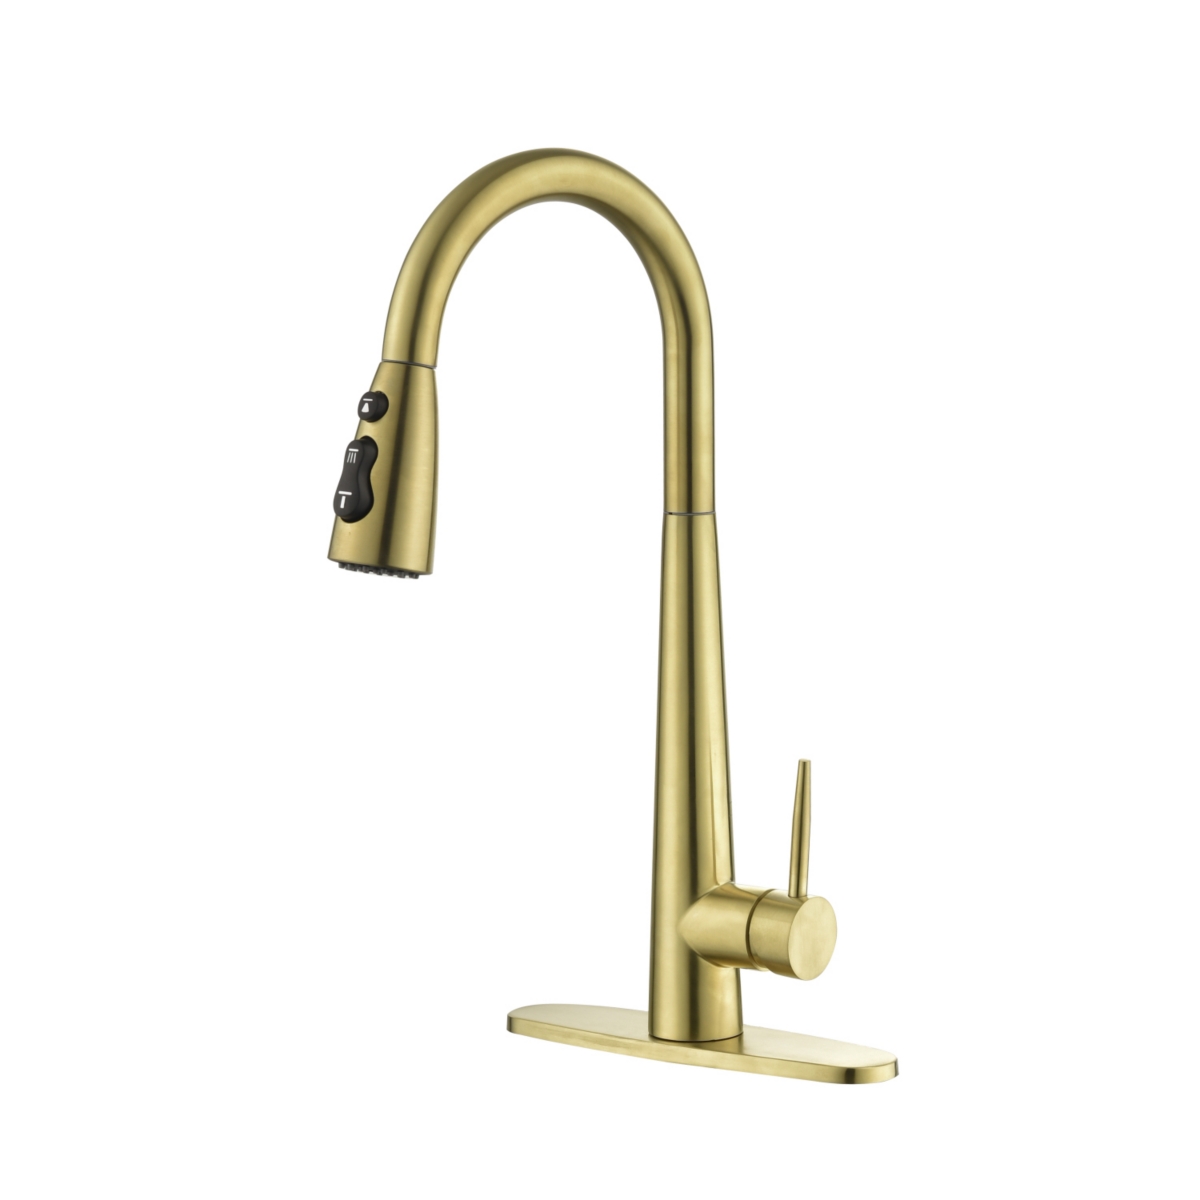 Gold Kitchen Faucets With Pull Down Sprayer, Kitchen Sink Faucet With Pull Out Sprayer - Gold